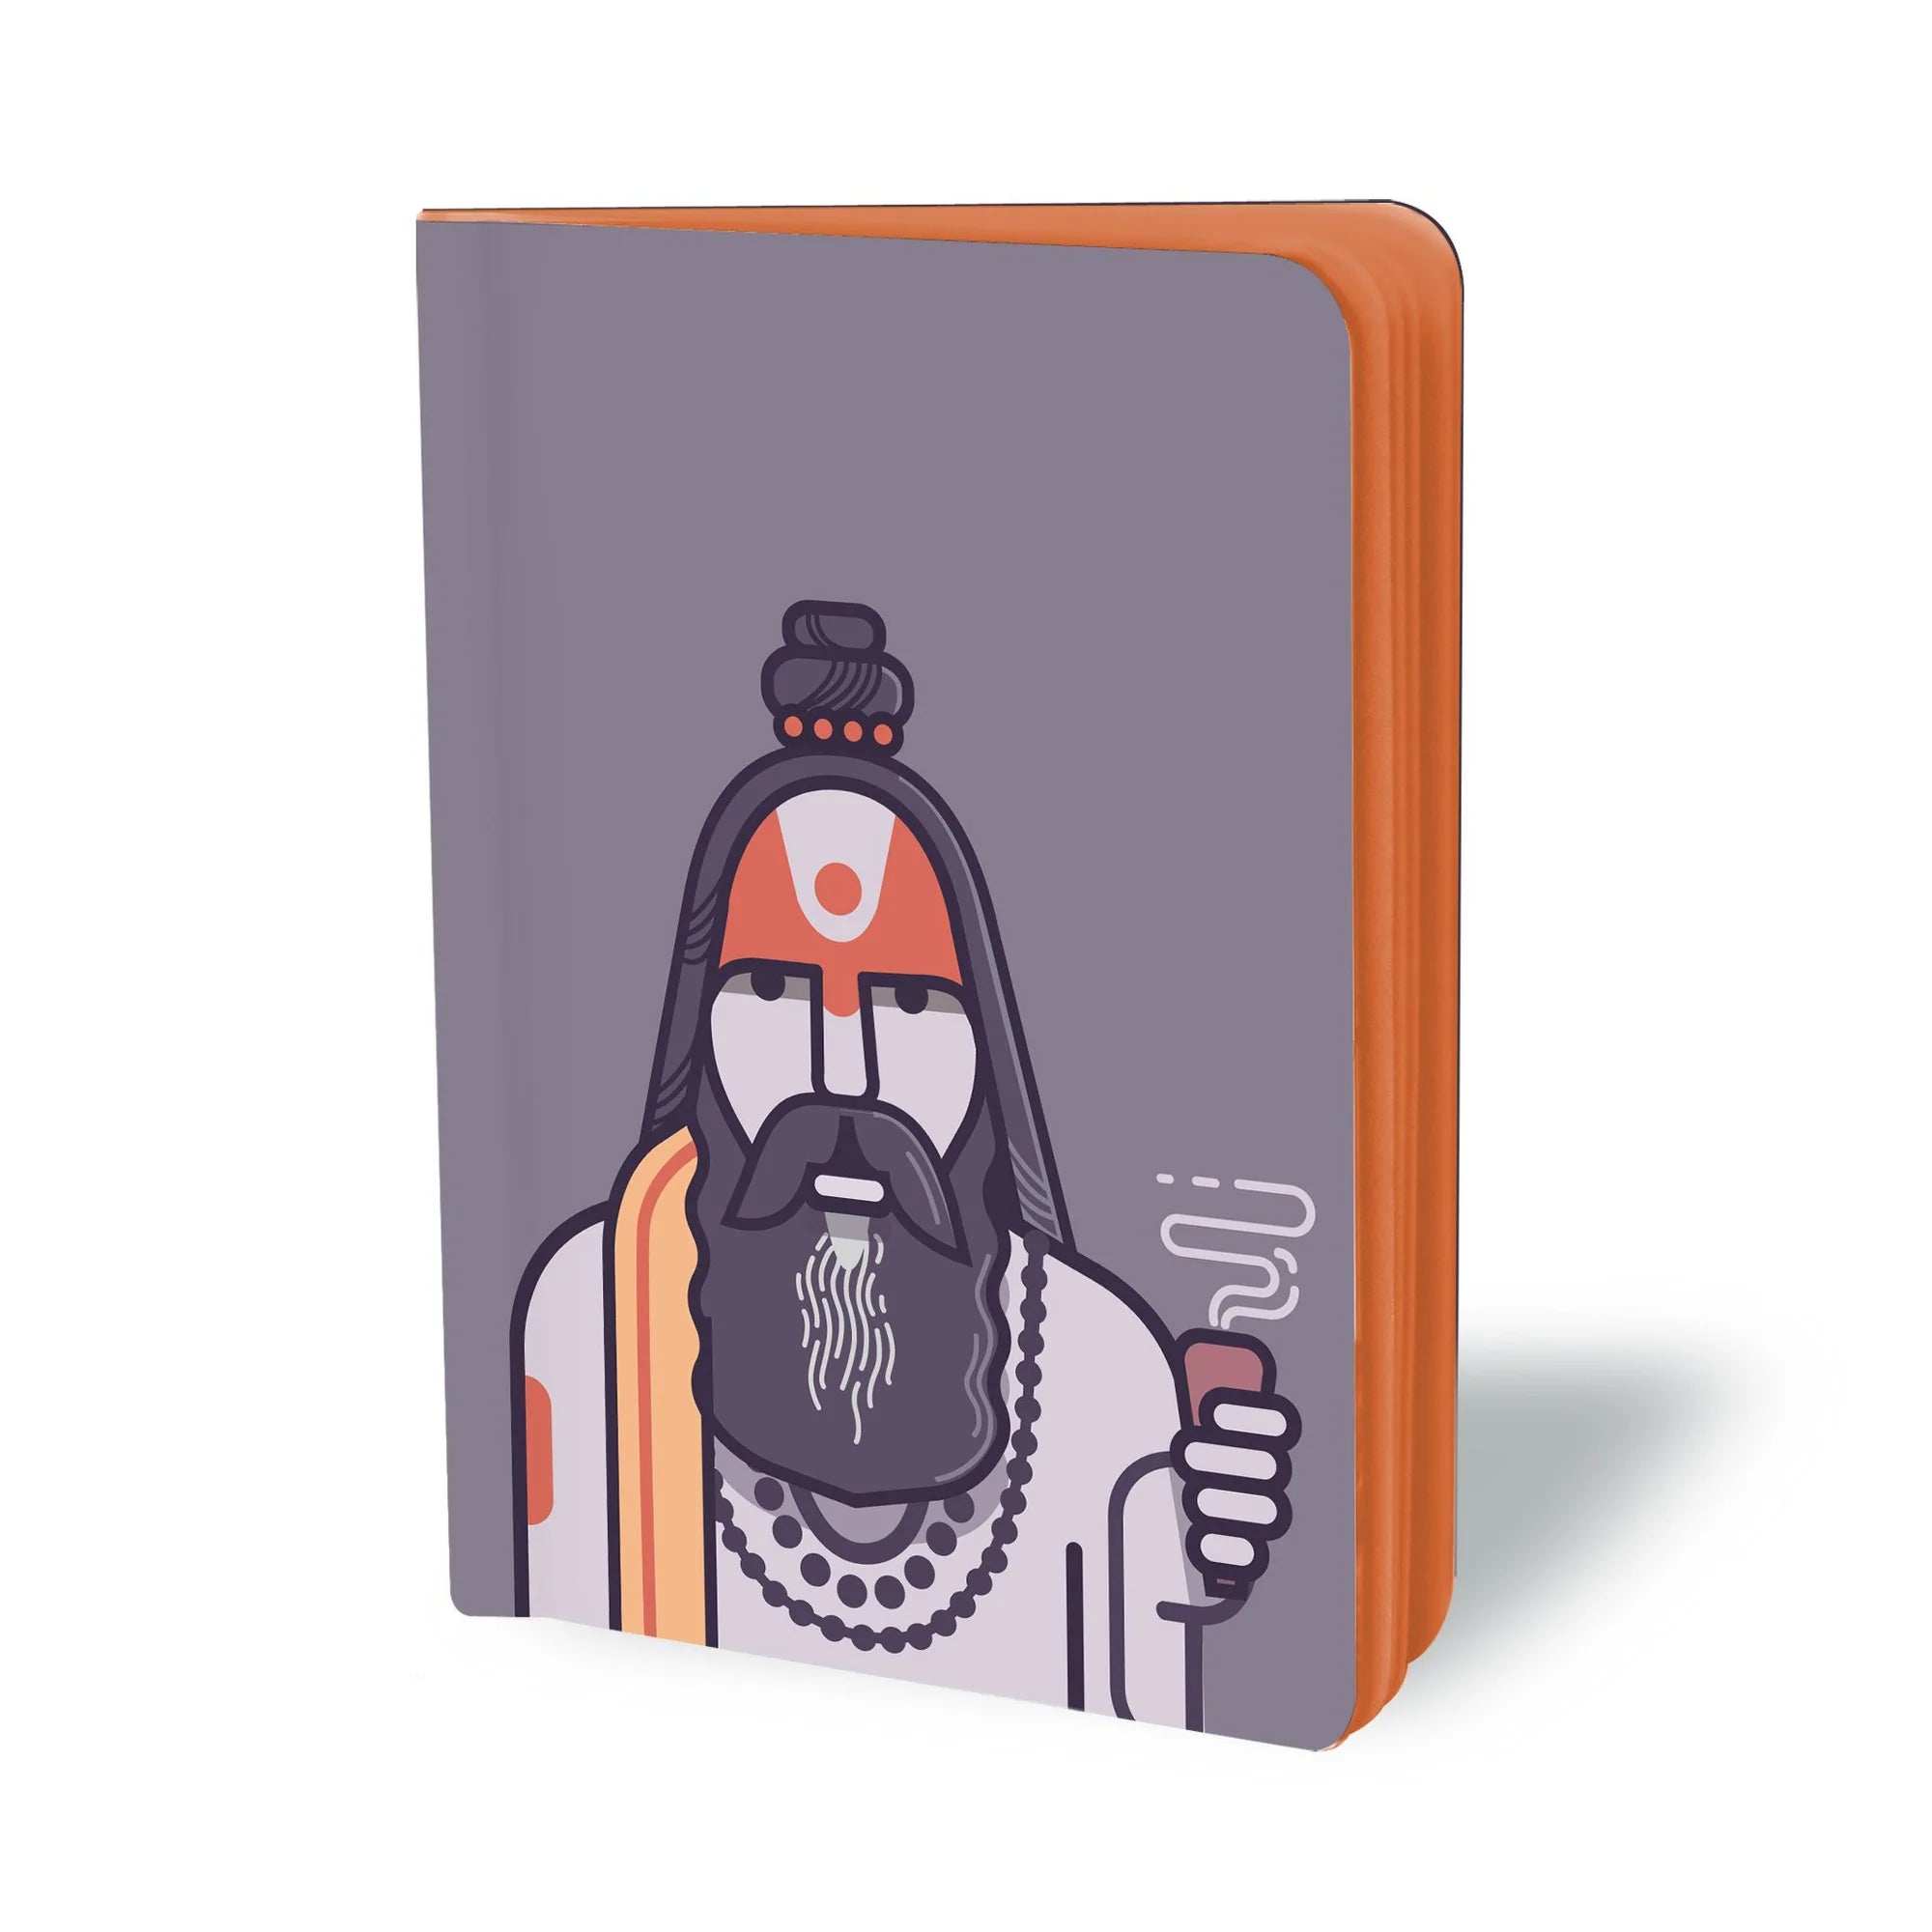 Indian Notebook - SAINTLY by Kulture Shop